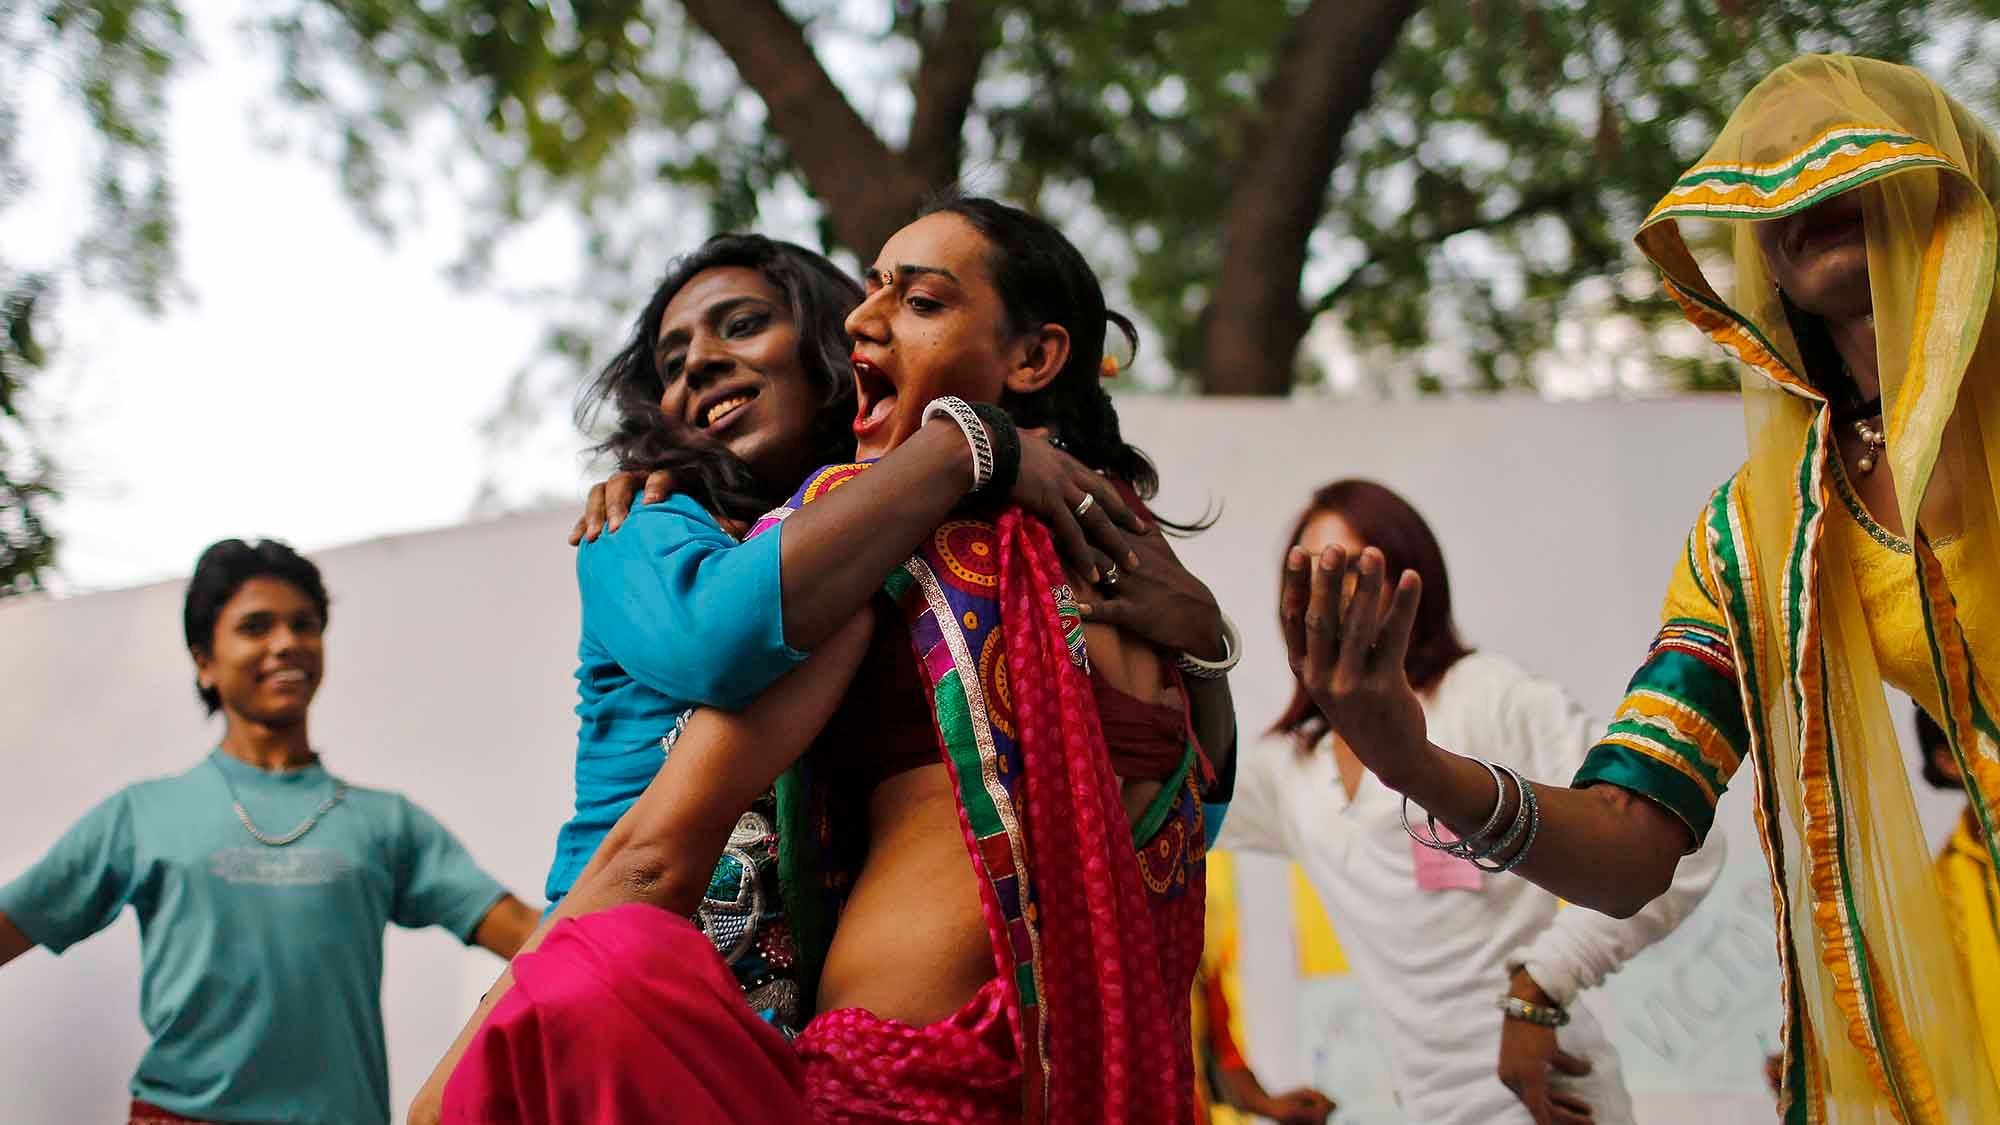 After SC’s landmark judgement last year, Kerala gives transgenders another solid reason to celebrate. (Photo: Reuters)